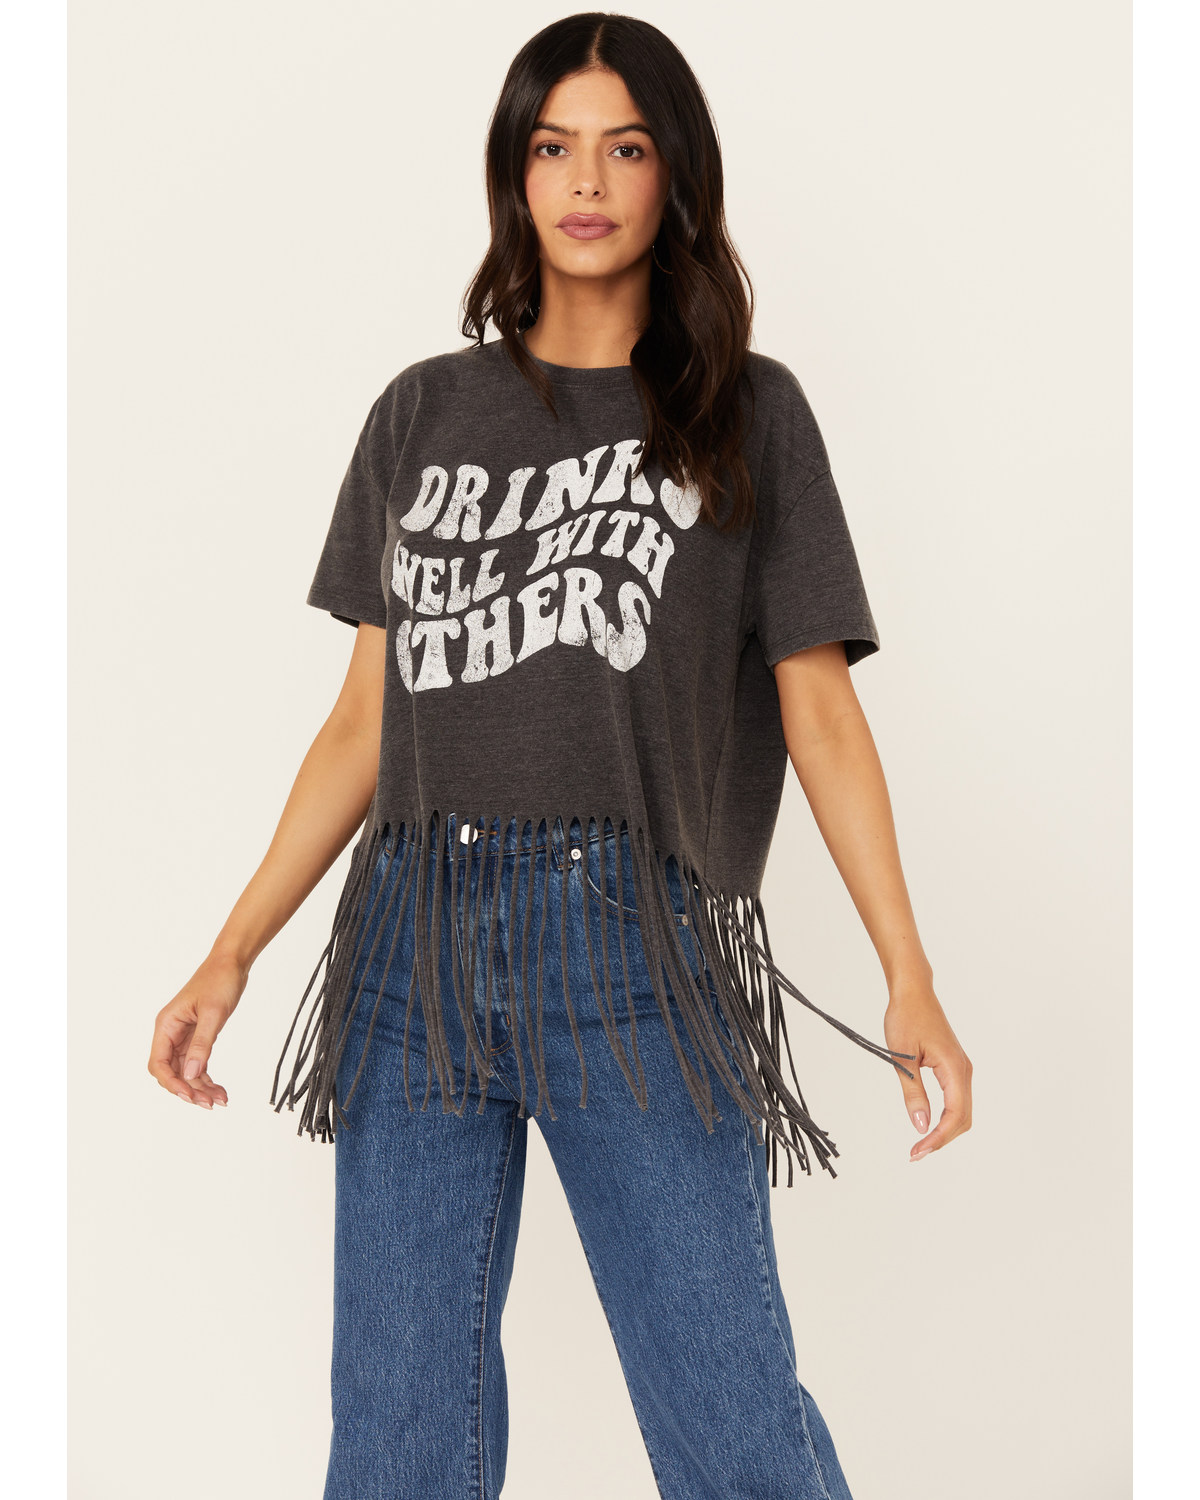 Blended Women's Drinks Well With Others Fringe Graphic Tee